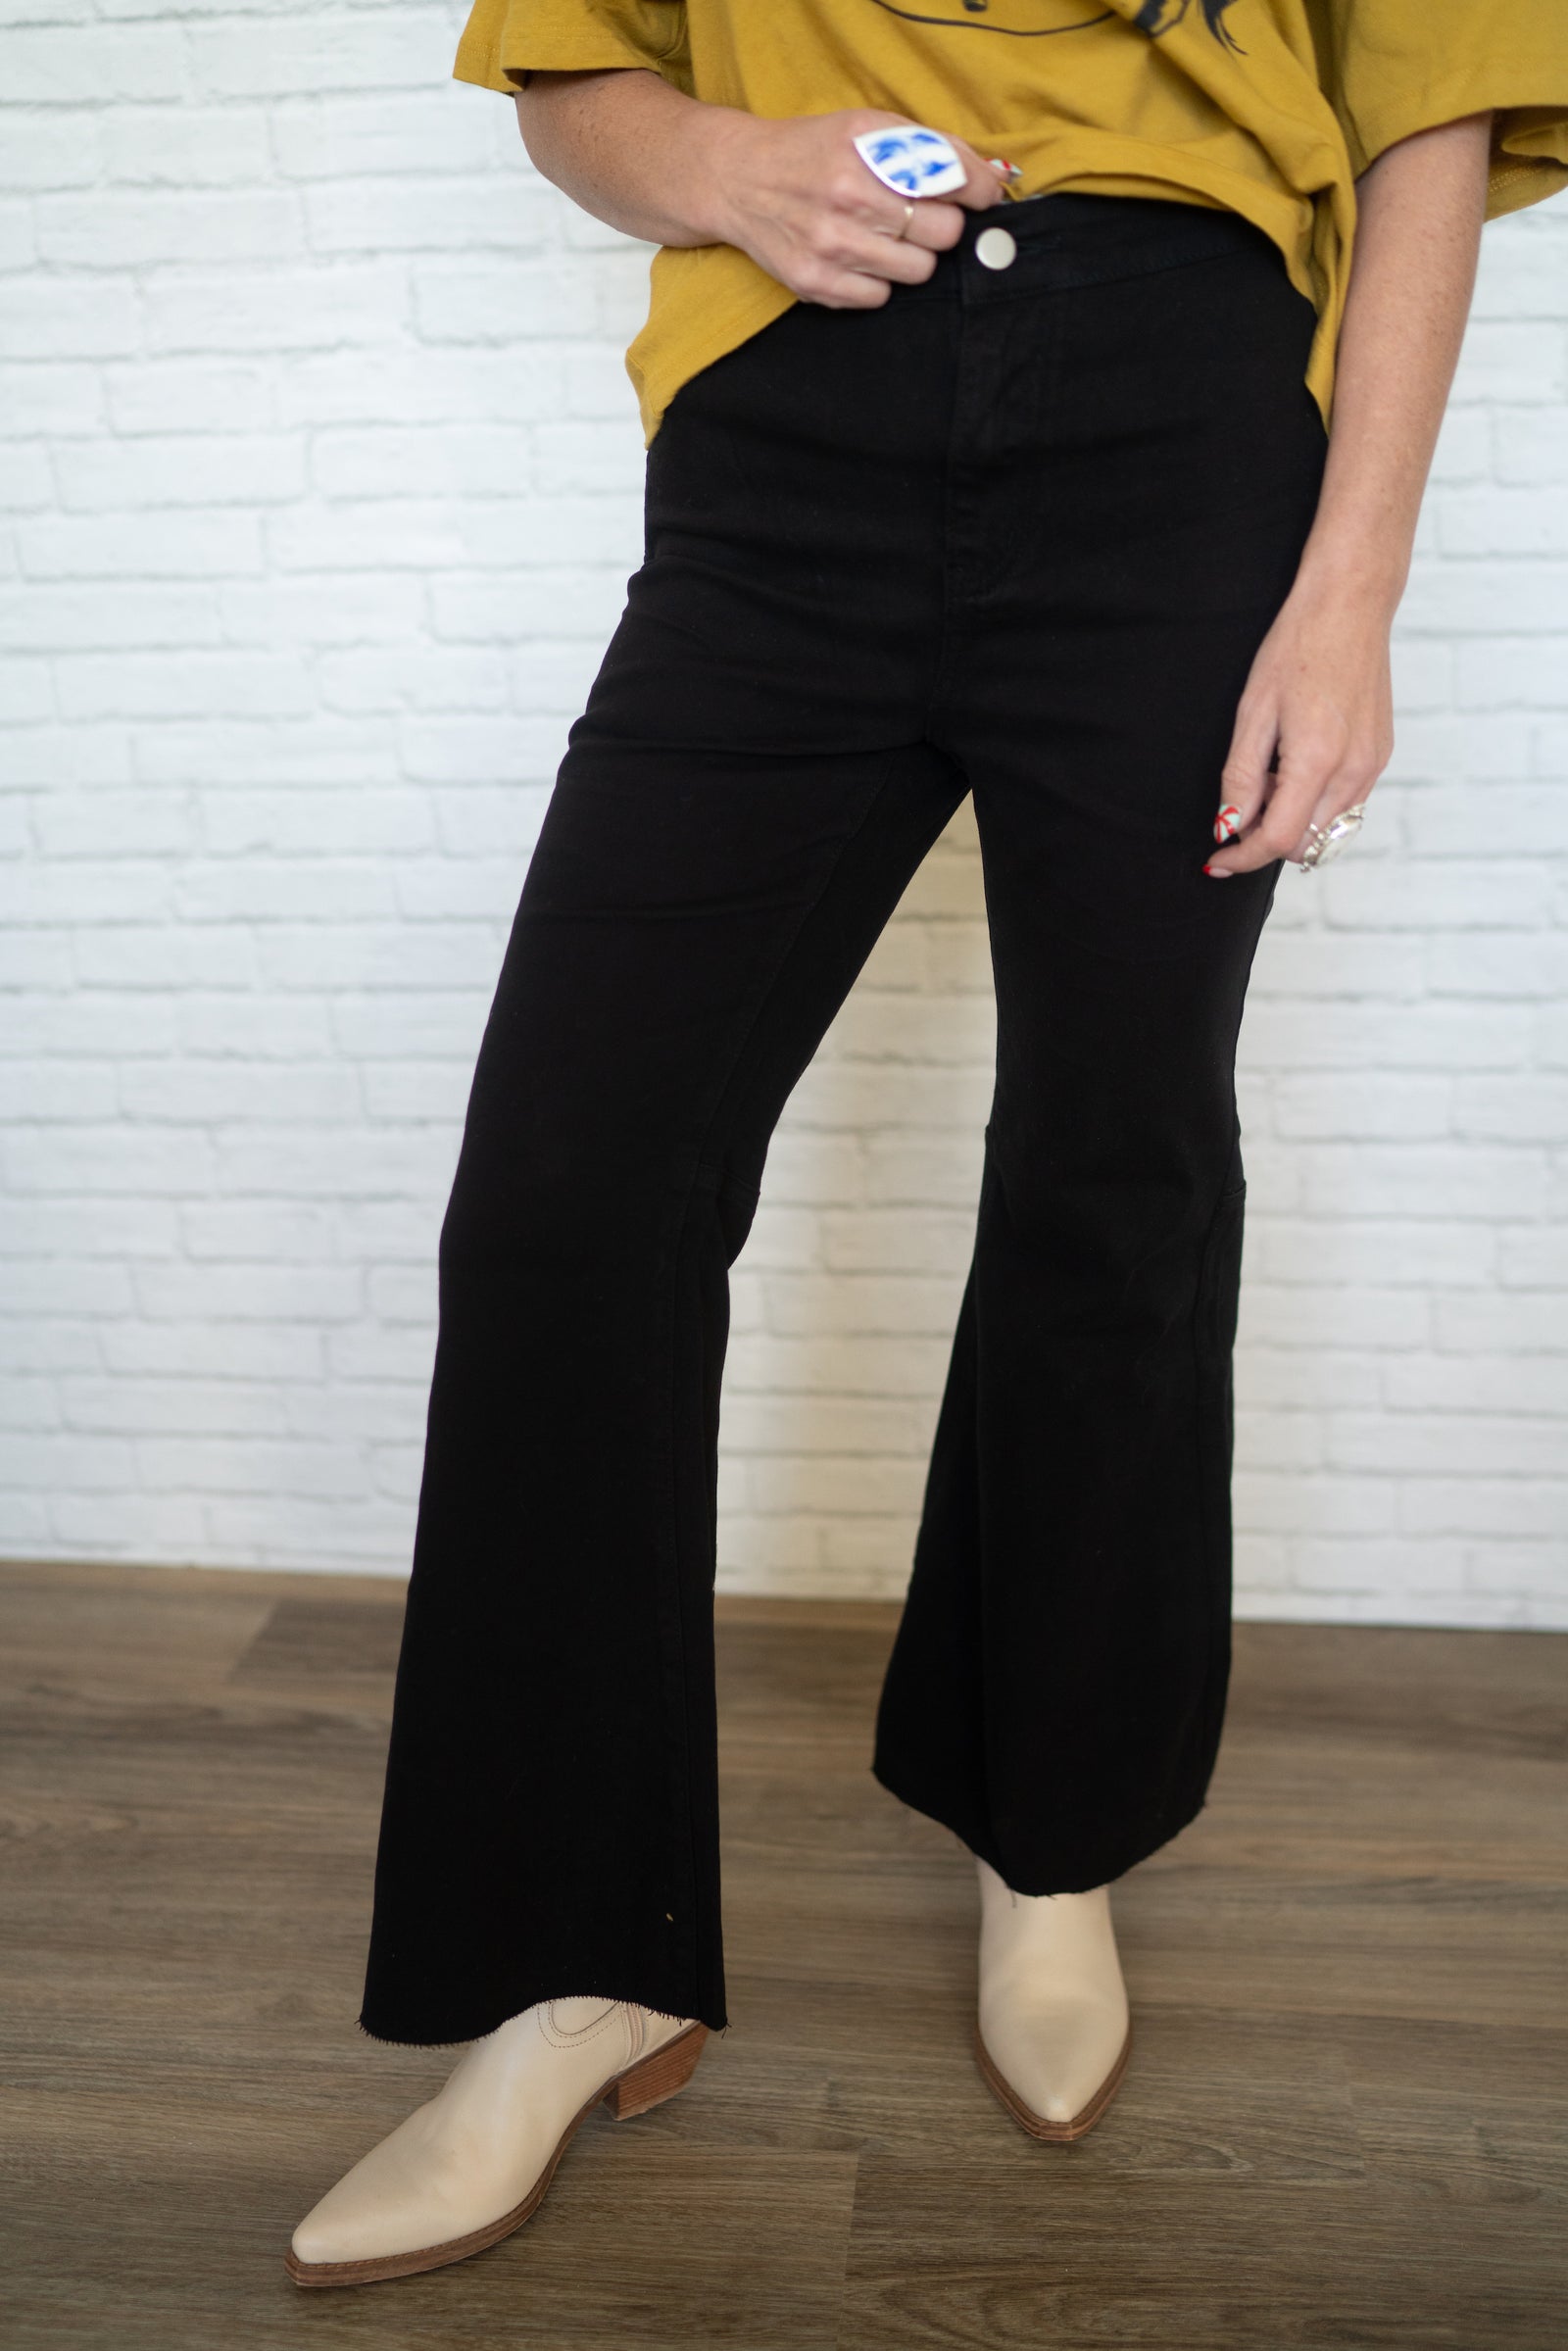 Bell of the Bottoms Pants | Black